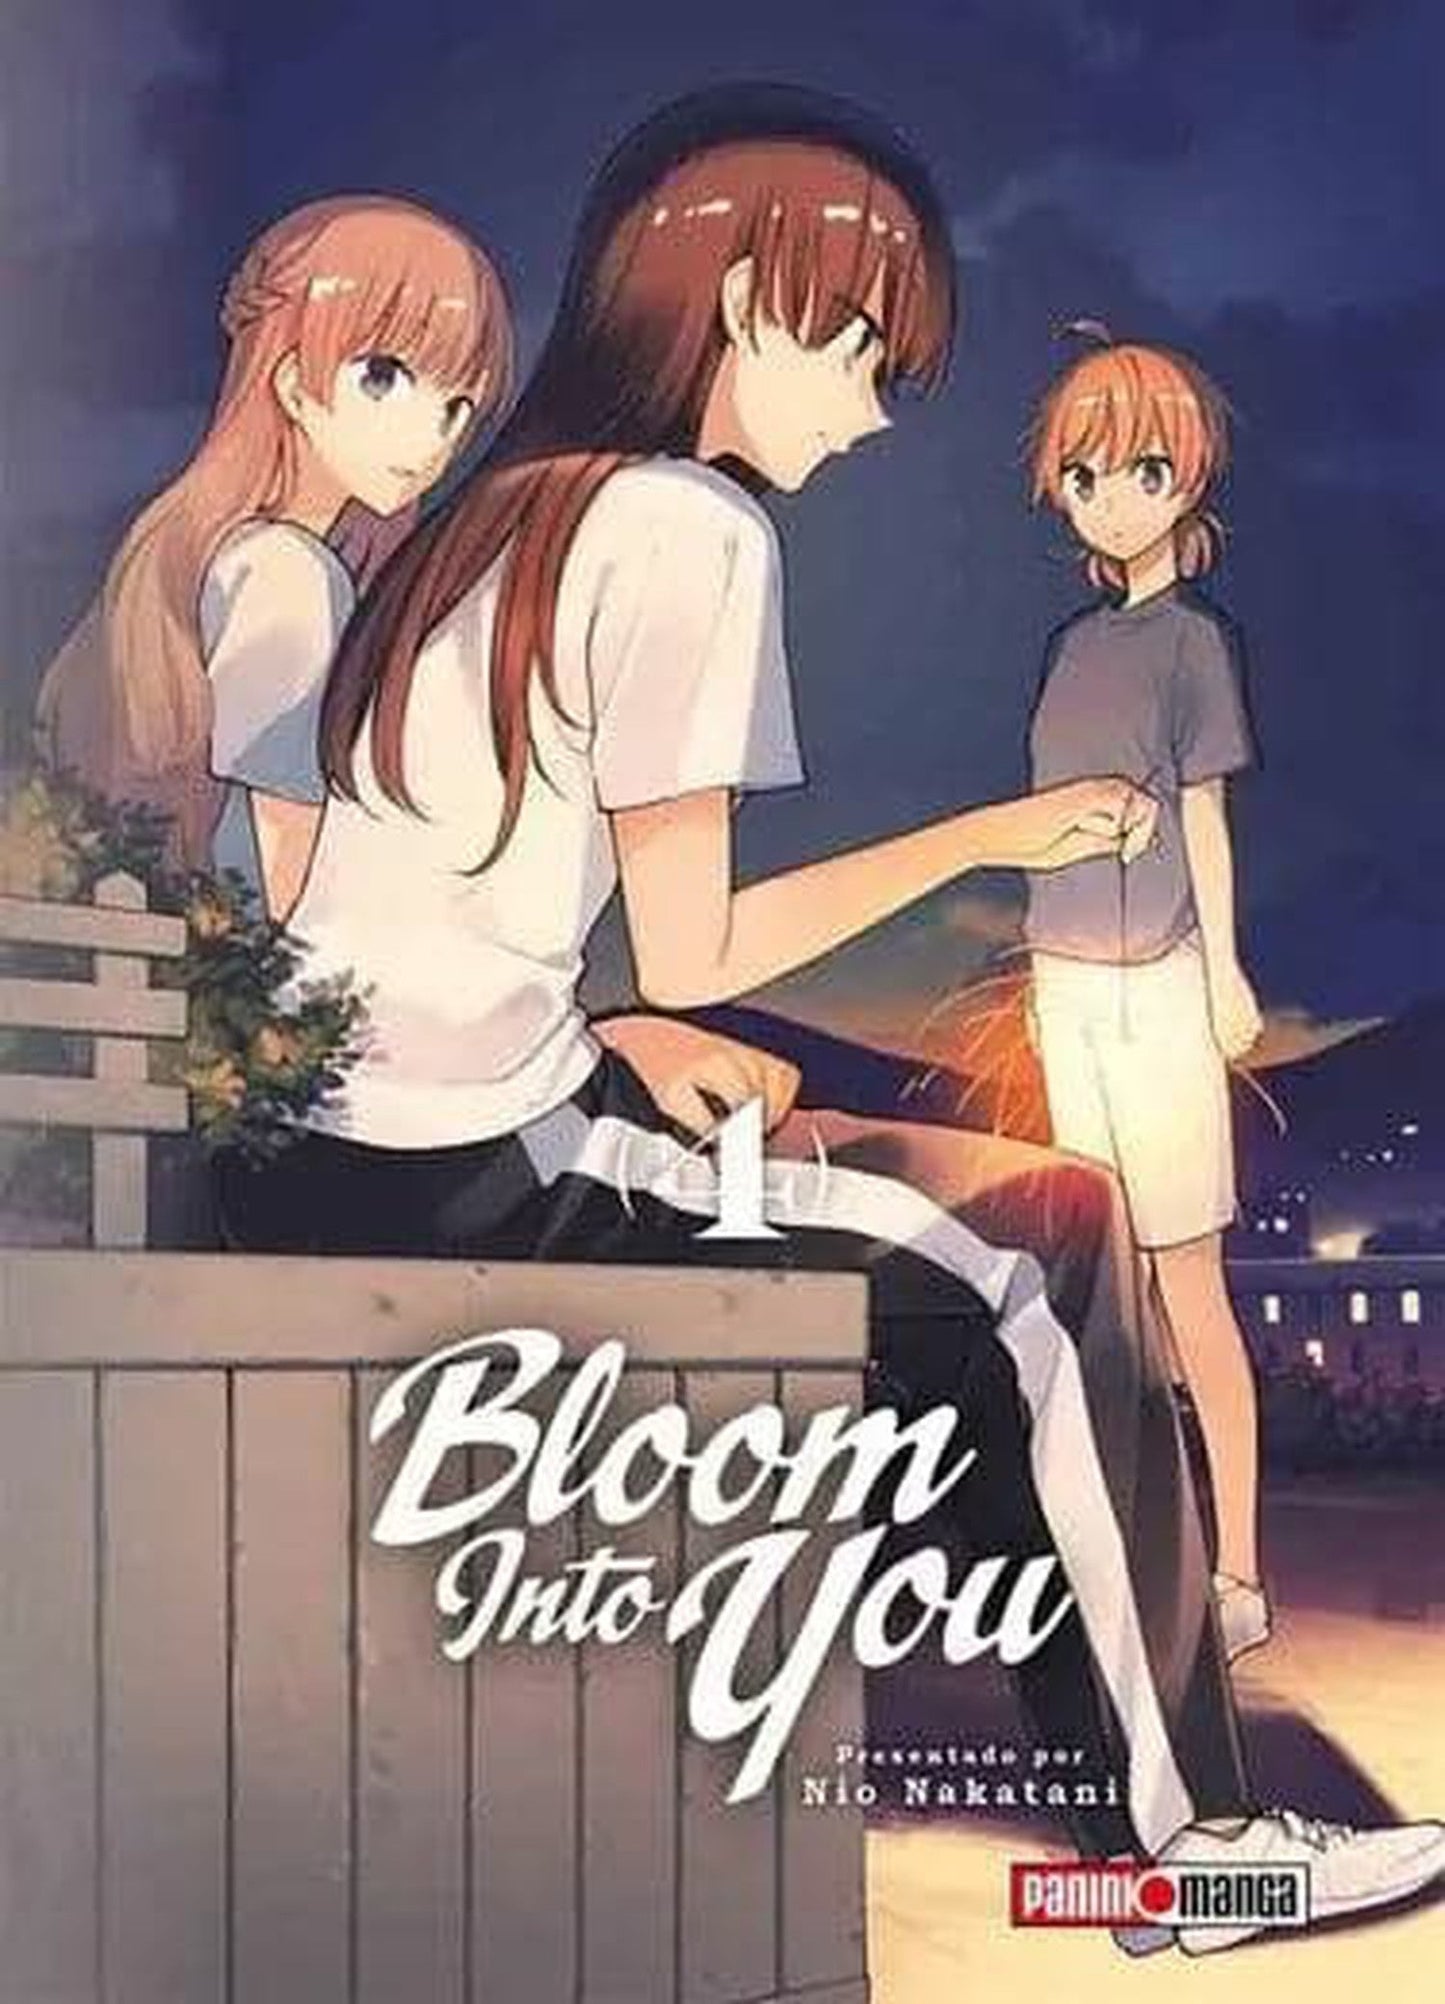 Bloom Into You #4